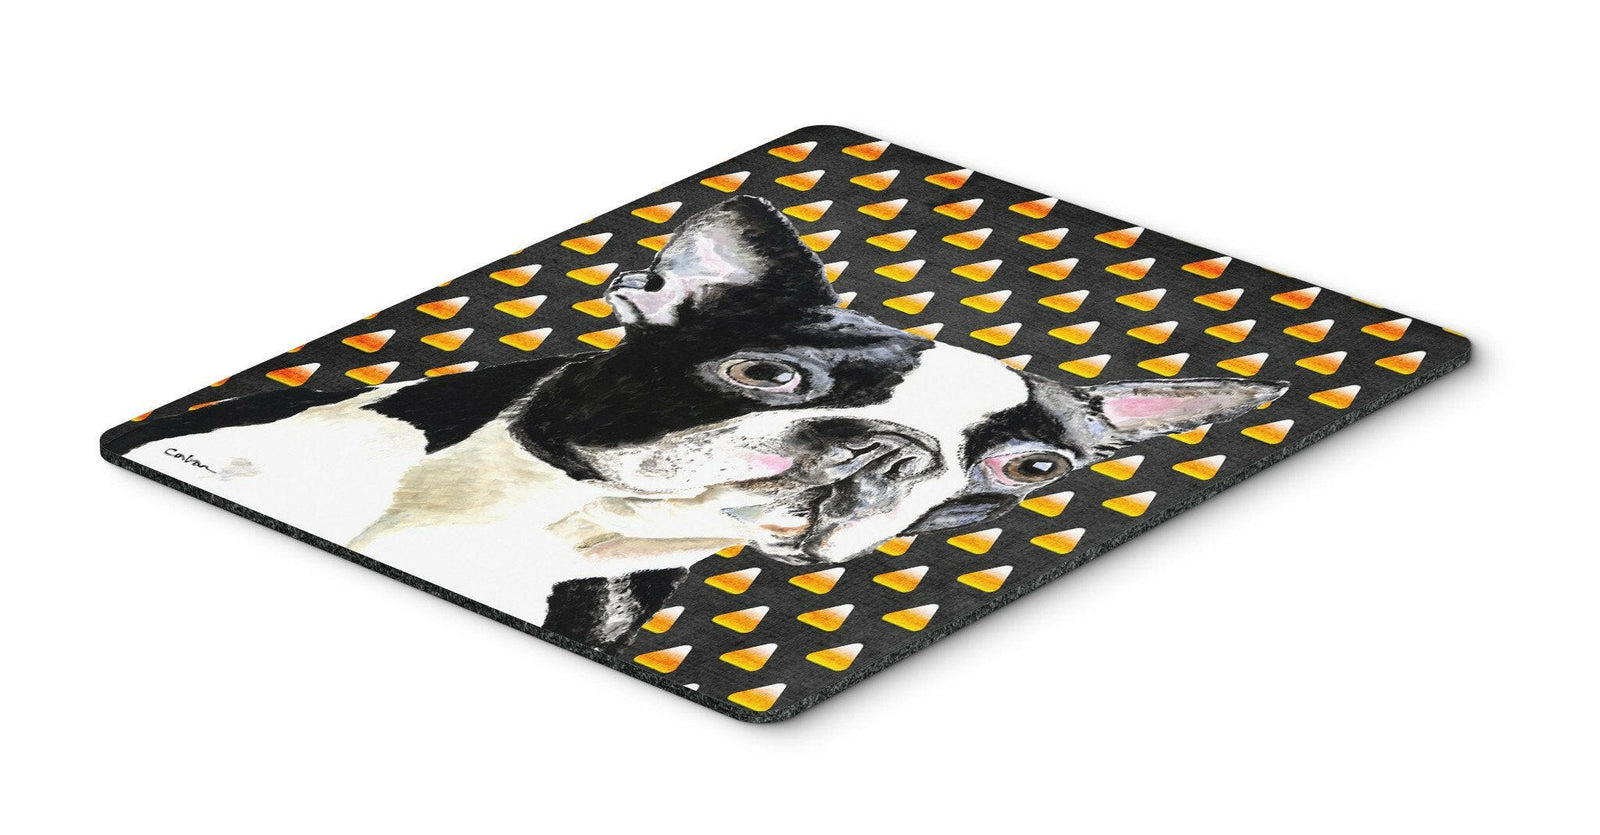 Boston Terrier Candy Corn Halloween Portrait Mouse Pad, Hot Pad or Trivet by Caroline's Treasures